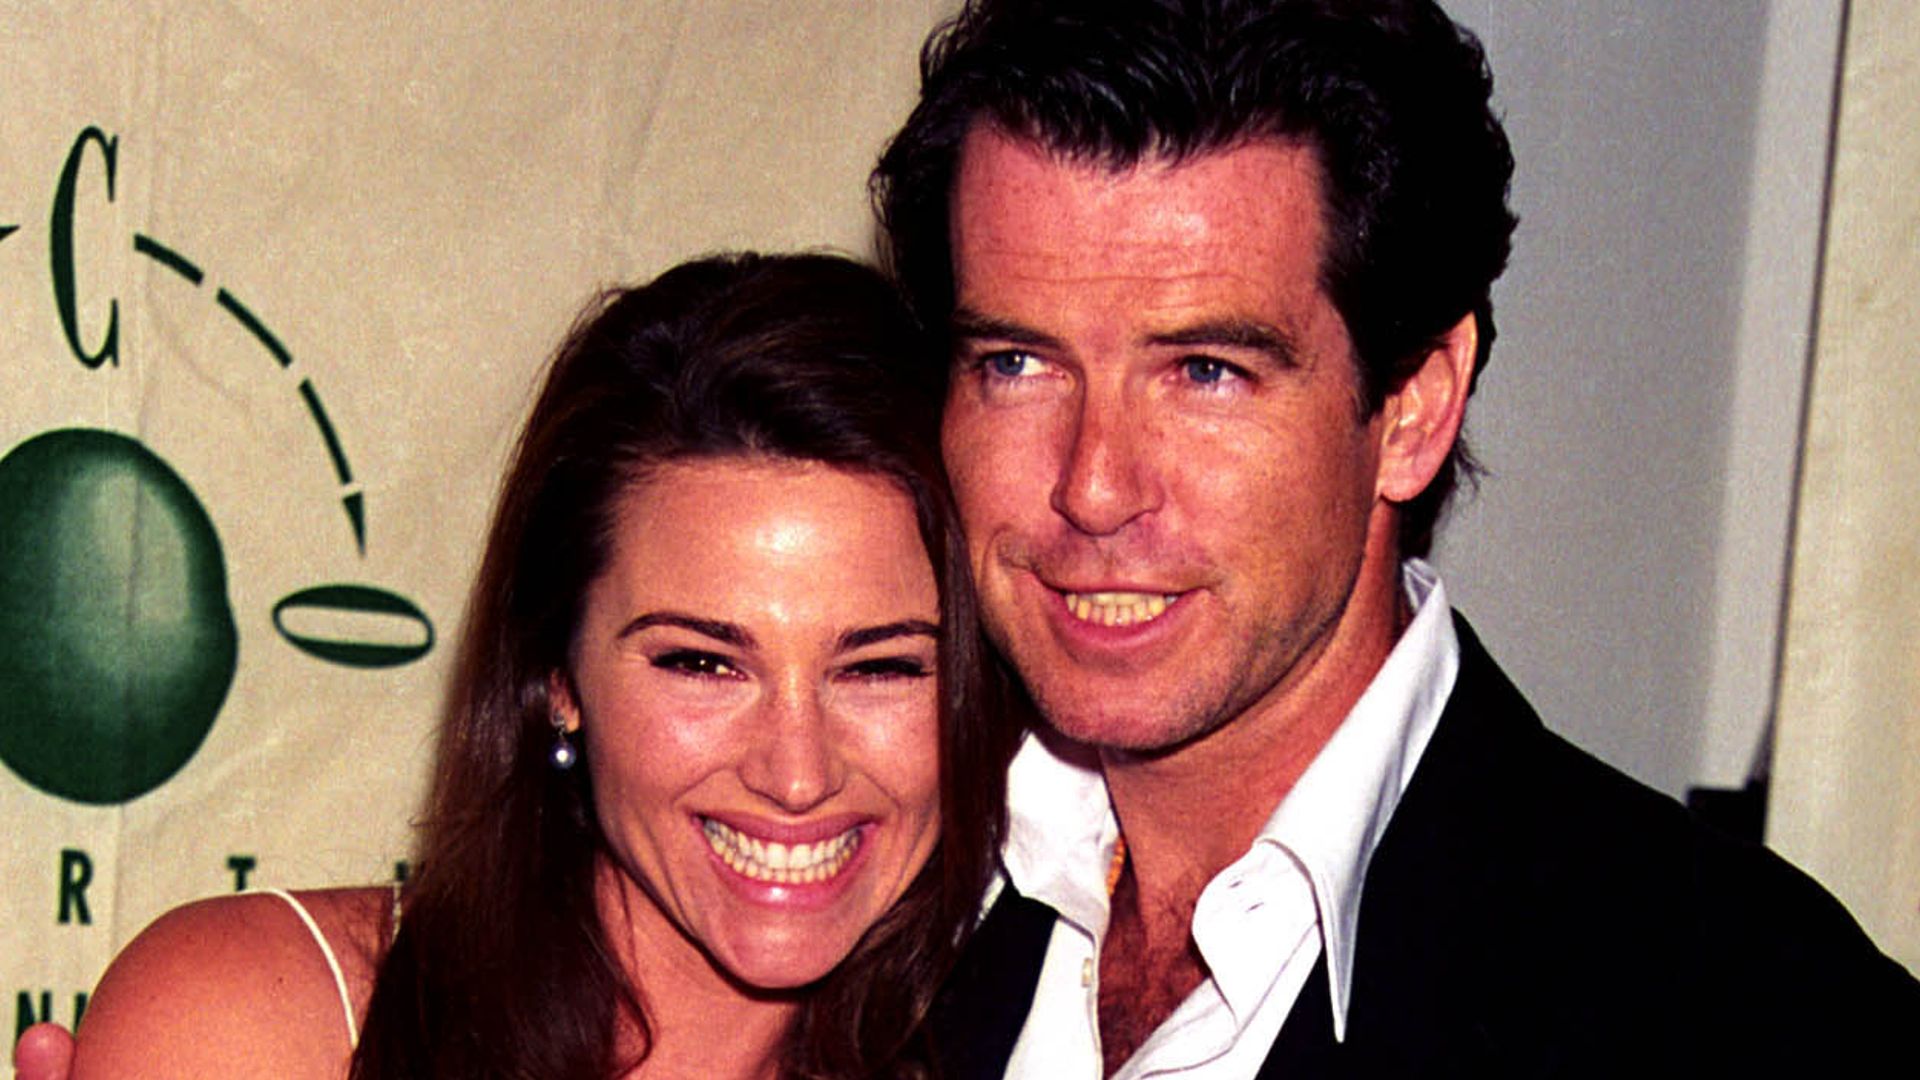 Keely Shaye Smith grinning in a white dress and Pierce Brosnan in a suit